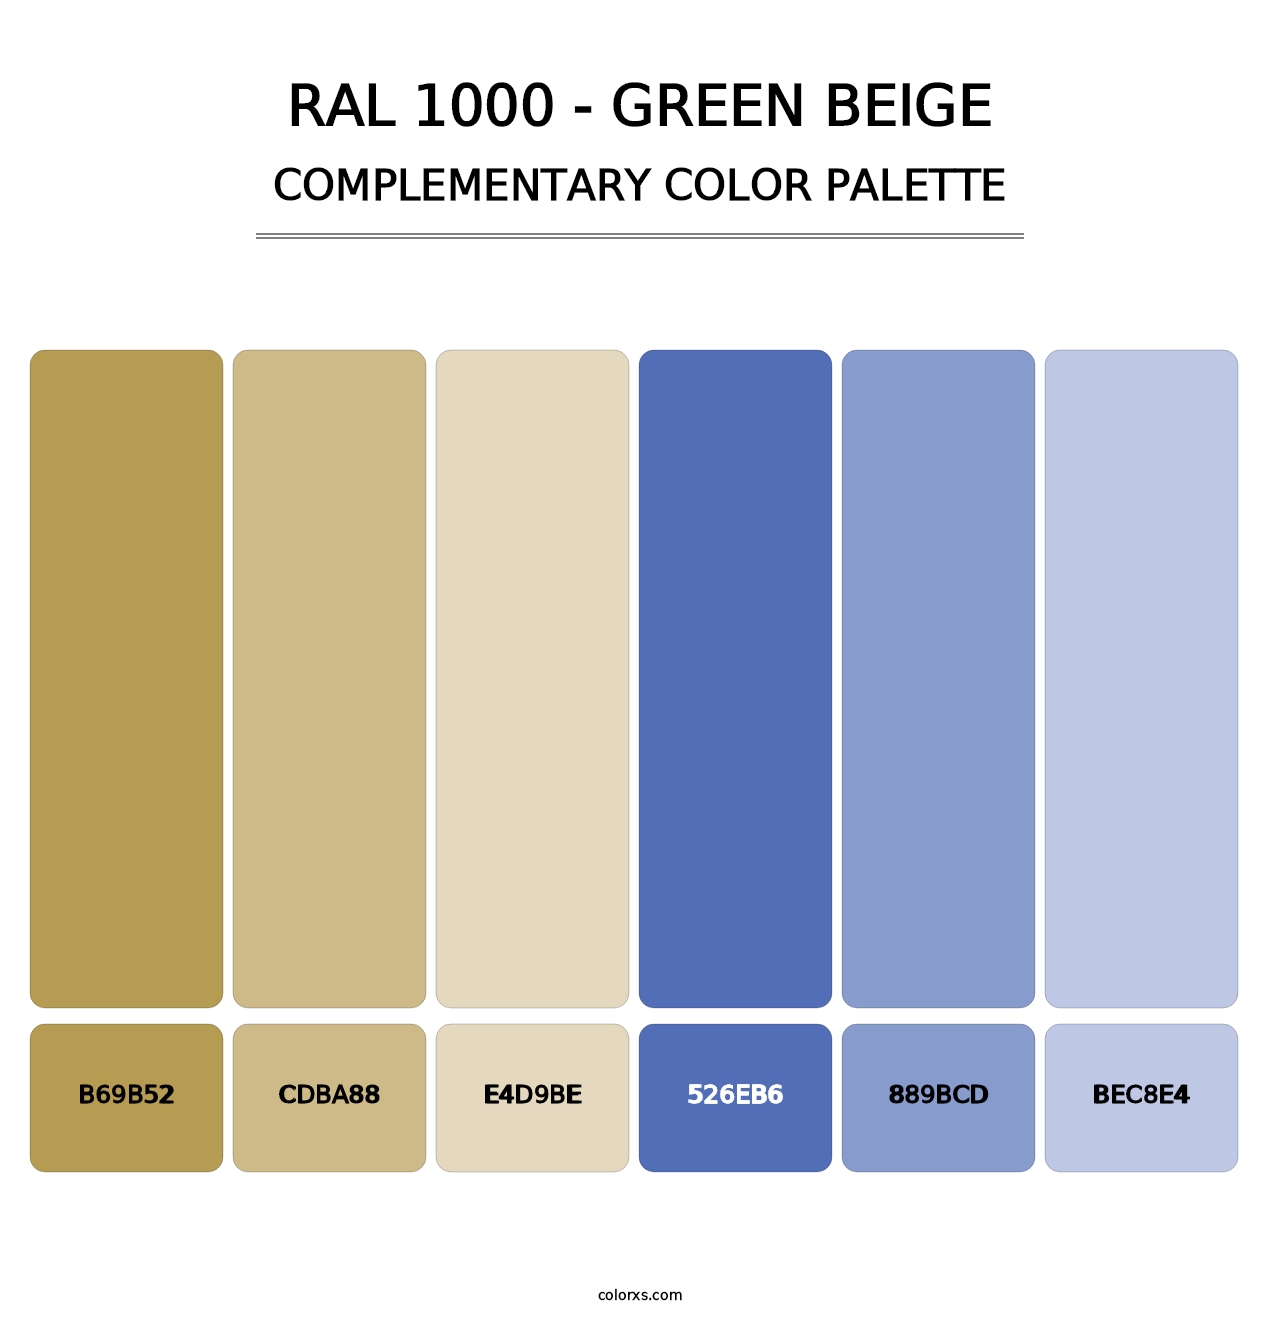 RAL 1000 - Green Beige - Complementary Color Palette